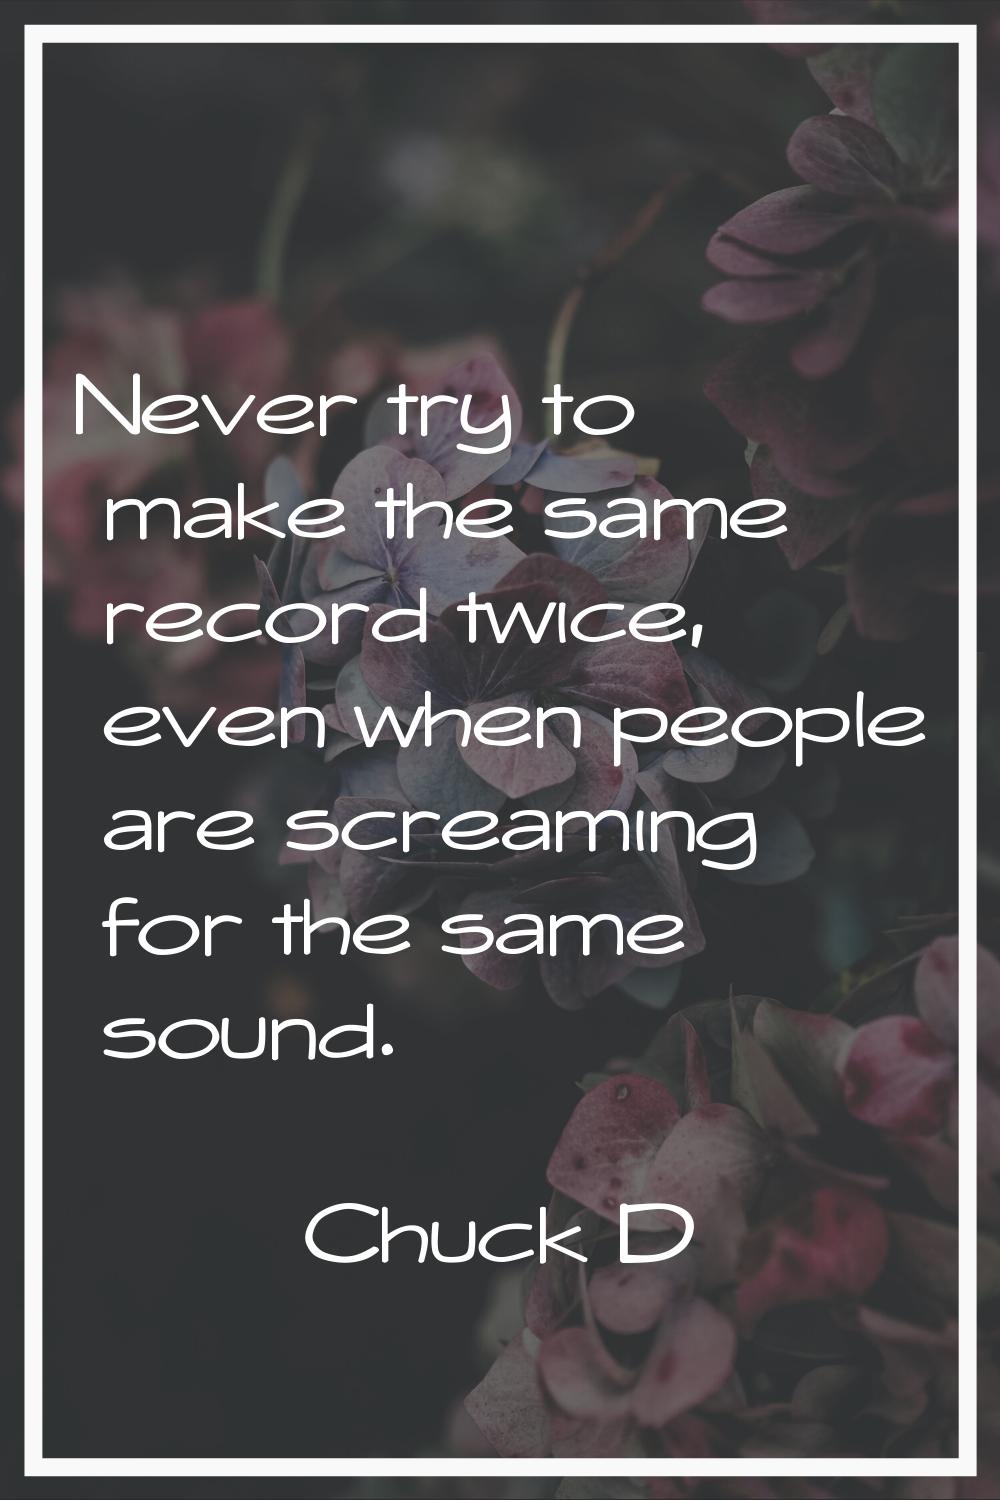 Never try to make the same record twice, even when people are screaming for the same sound.